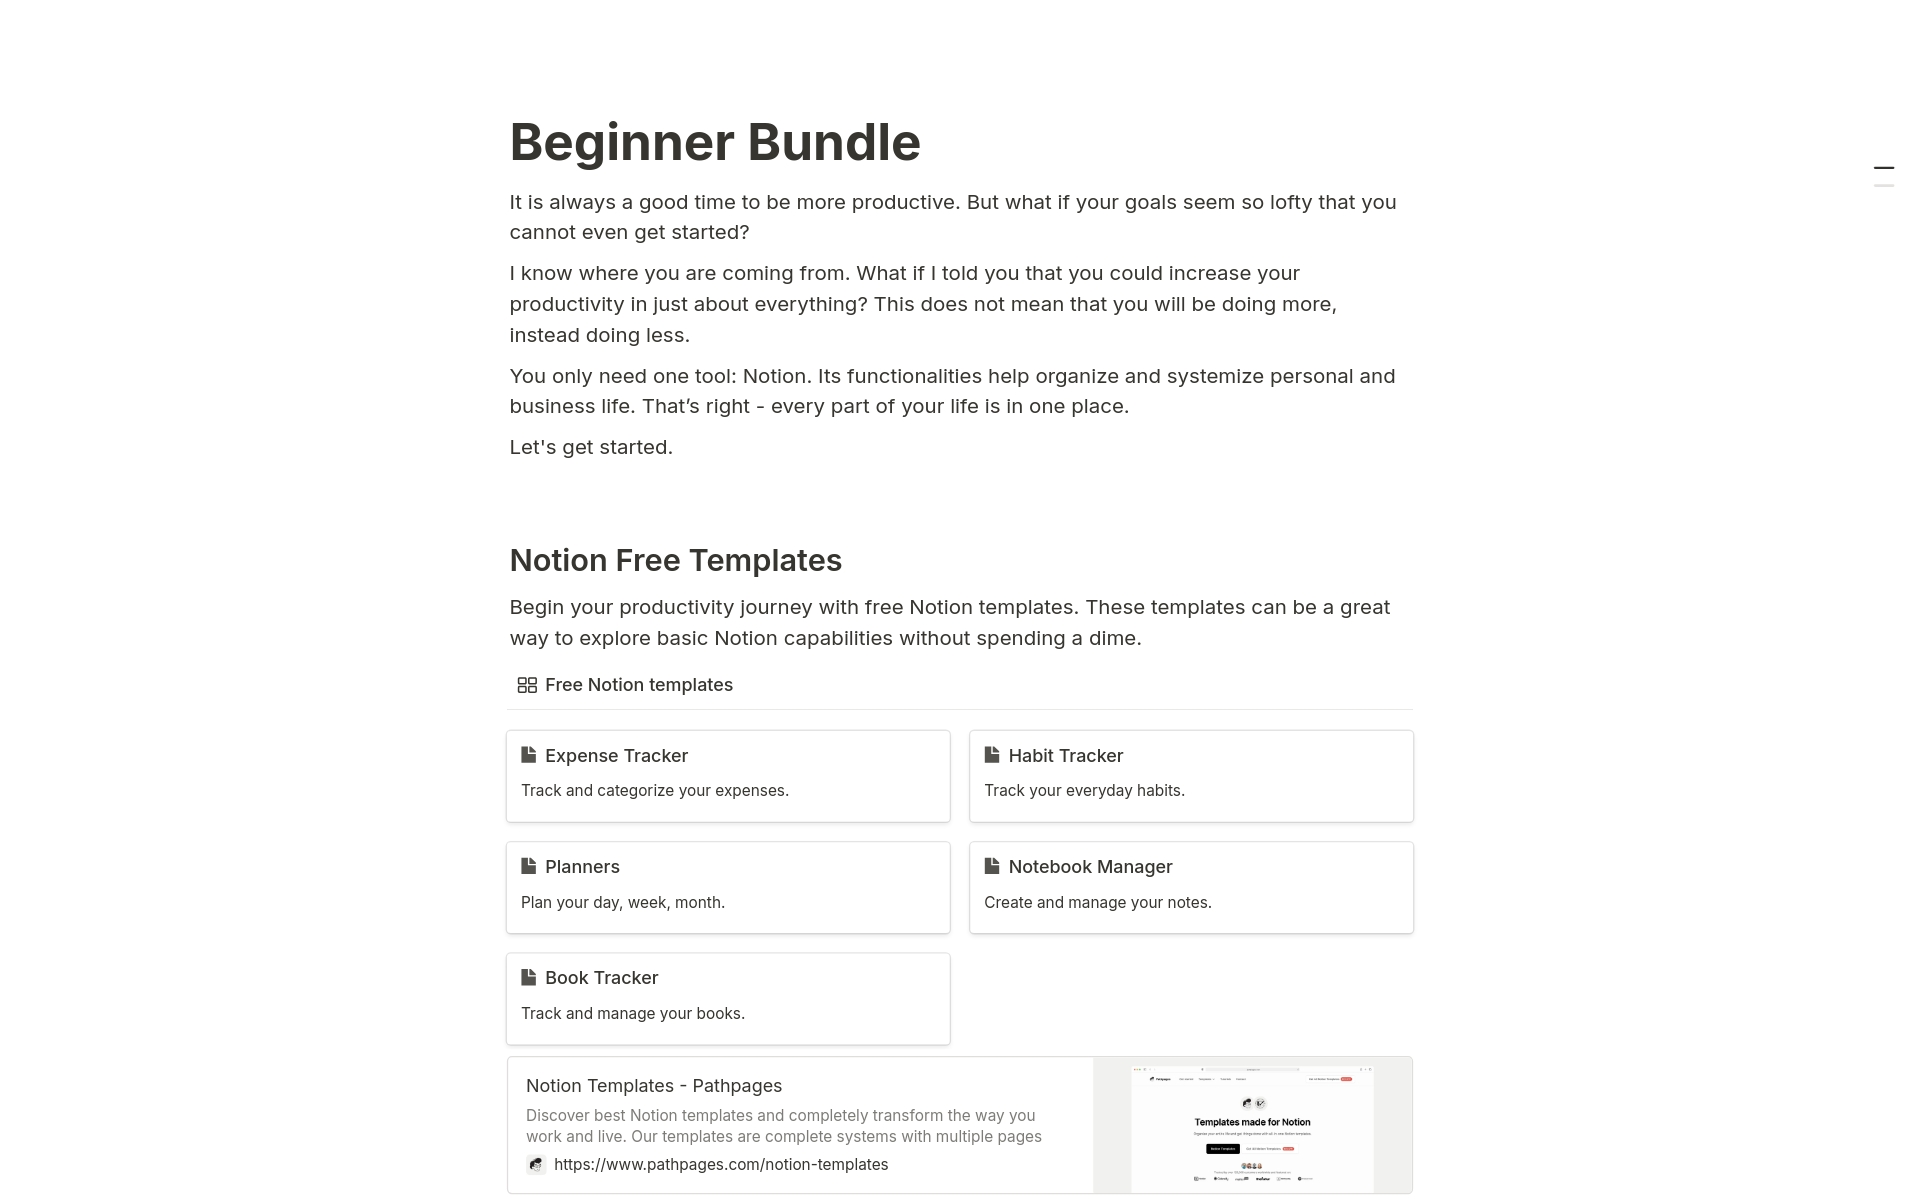 Start your Notion journey with a collection of 10 beginner templates.